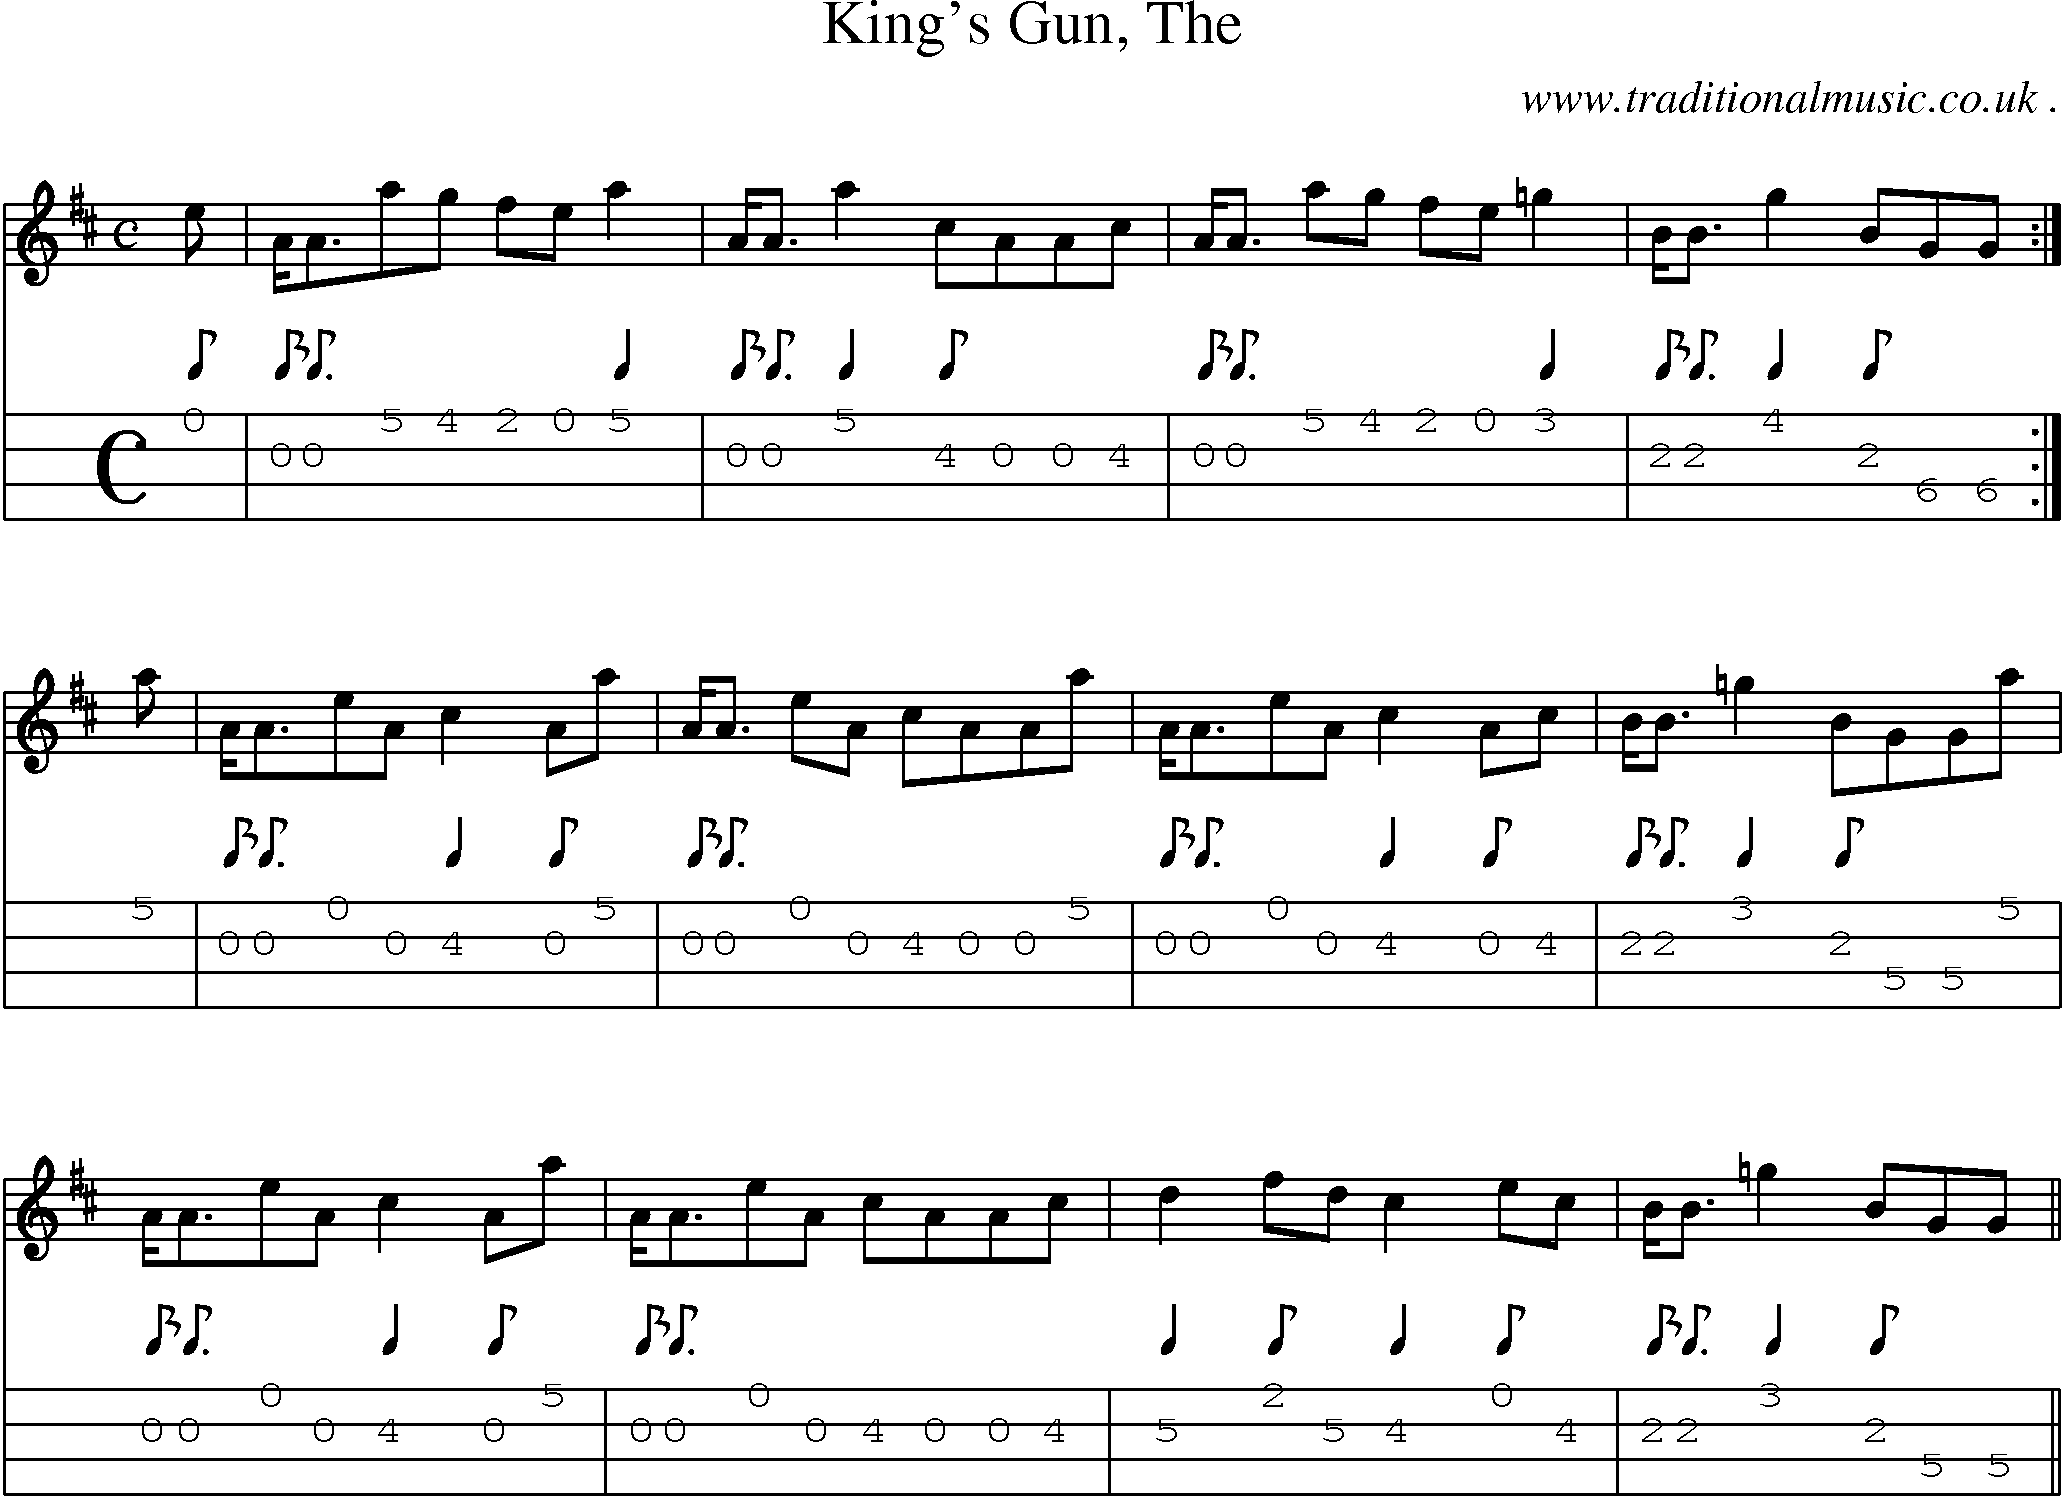 Sheet-music  score, Chords and Mandolin Tabs for Kings Gun The